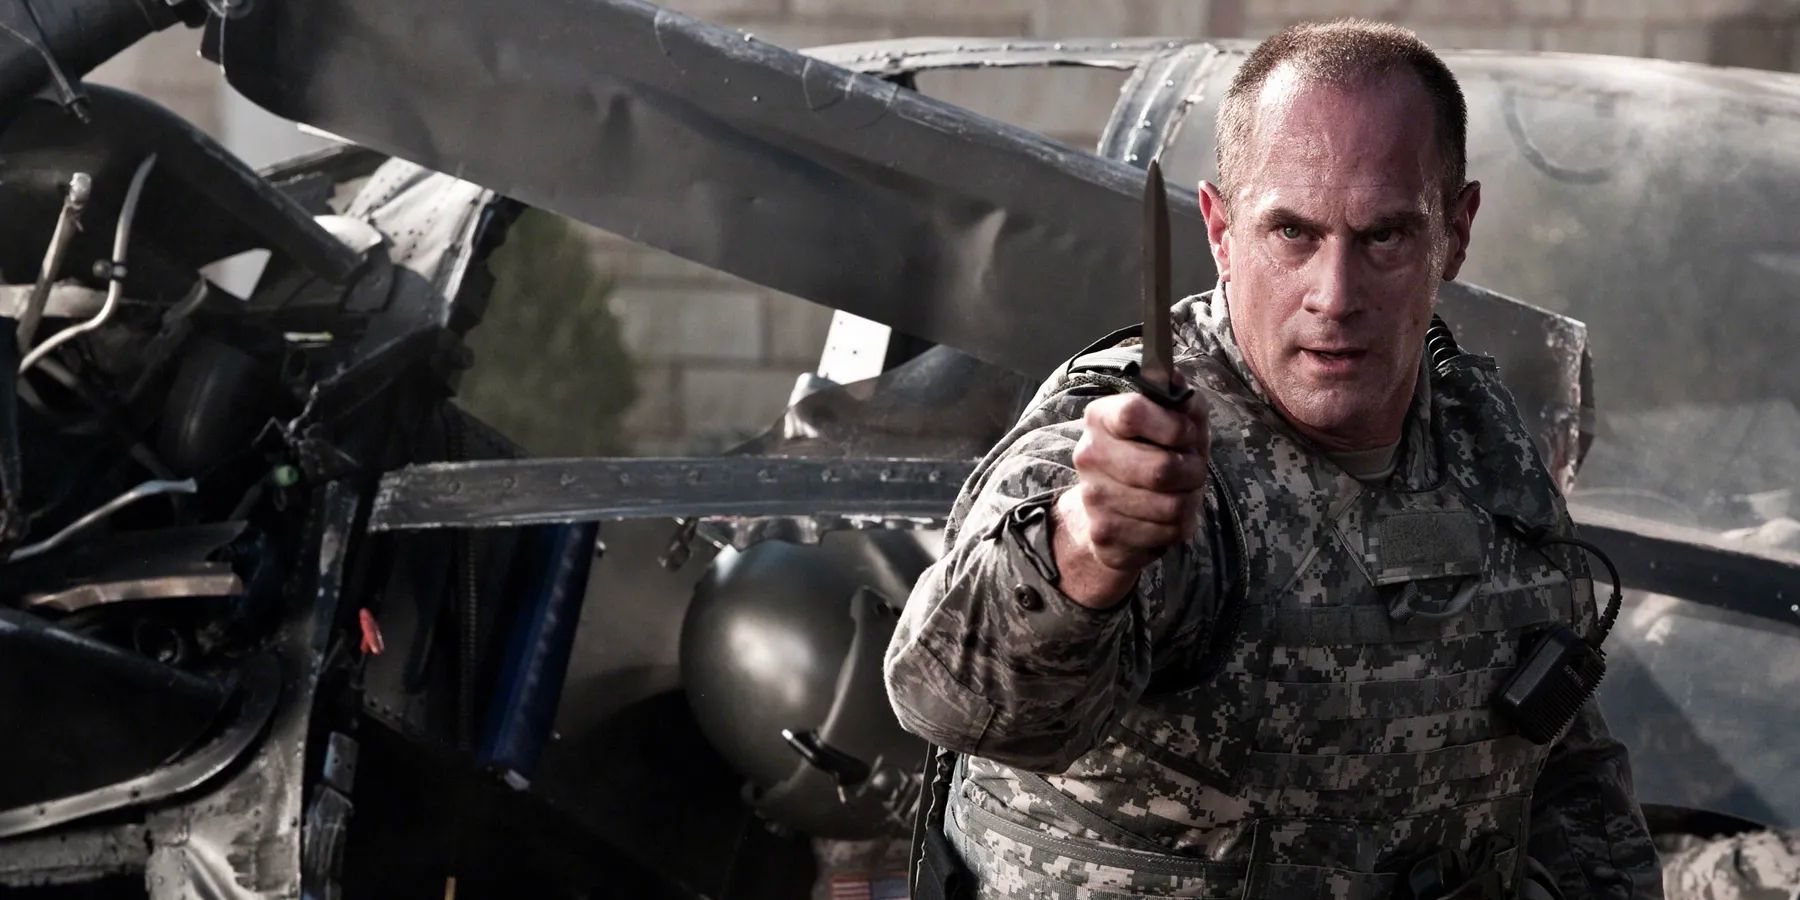 An army Colonel wields a knife as he emerges from a crashed helicopter and faces off with a power alien tyrant.